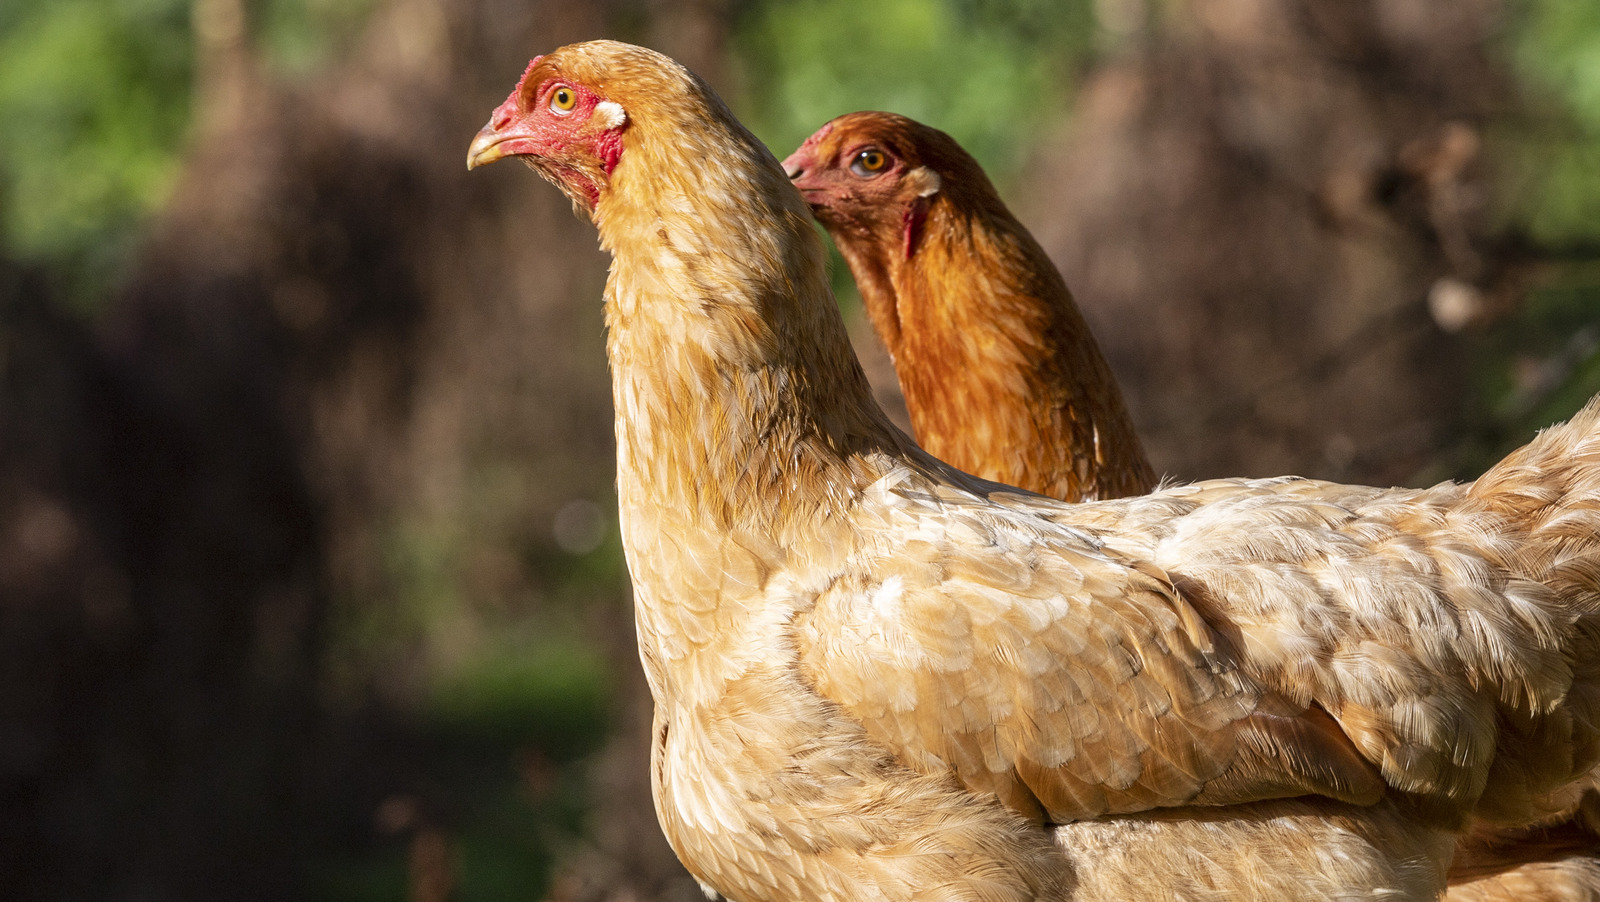 There Might Soon Be A Poultry Shortage. Here's Why